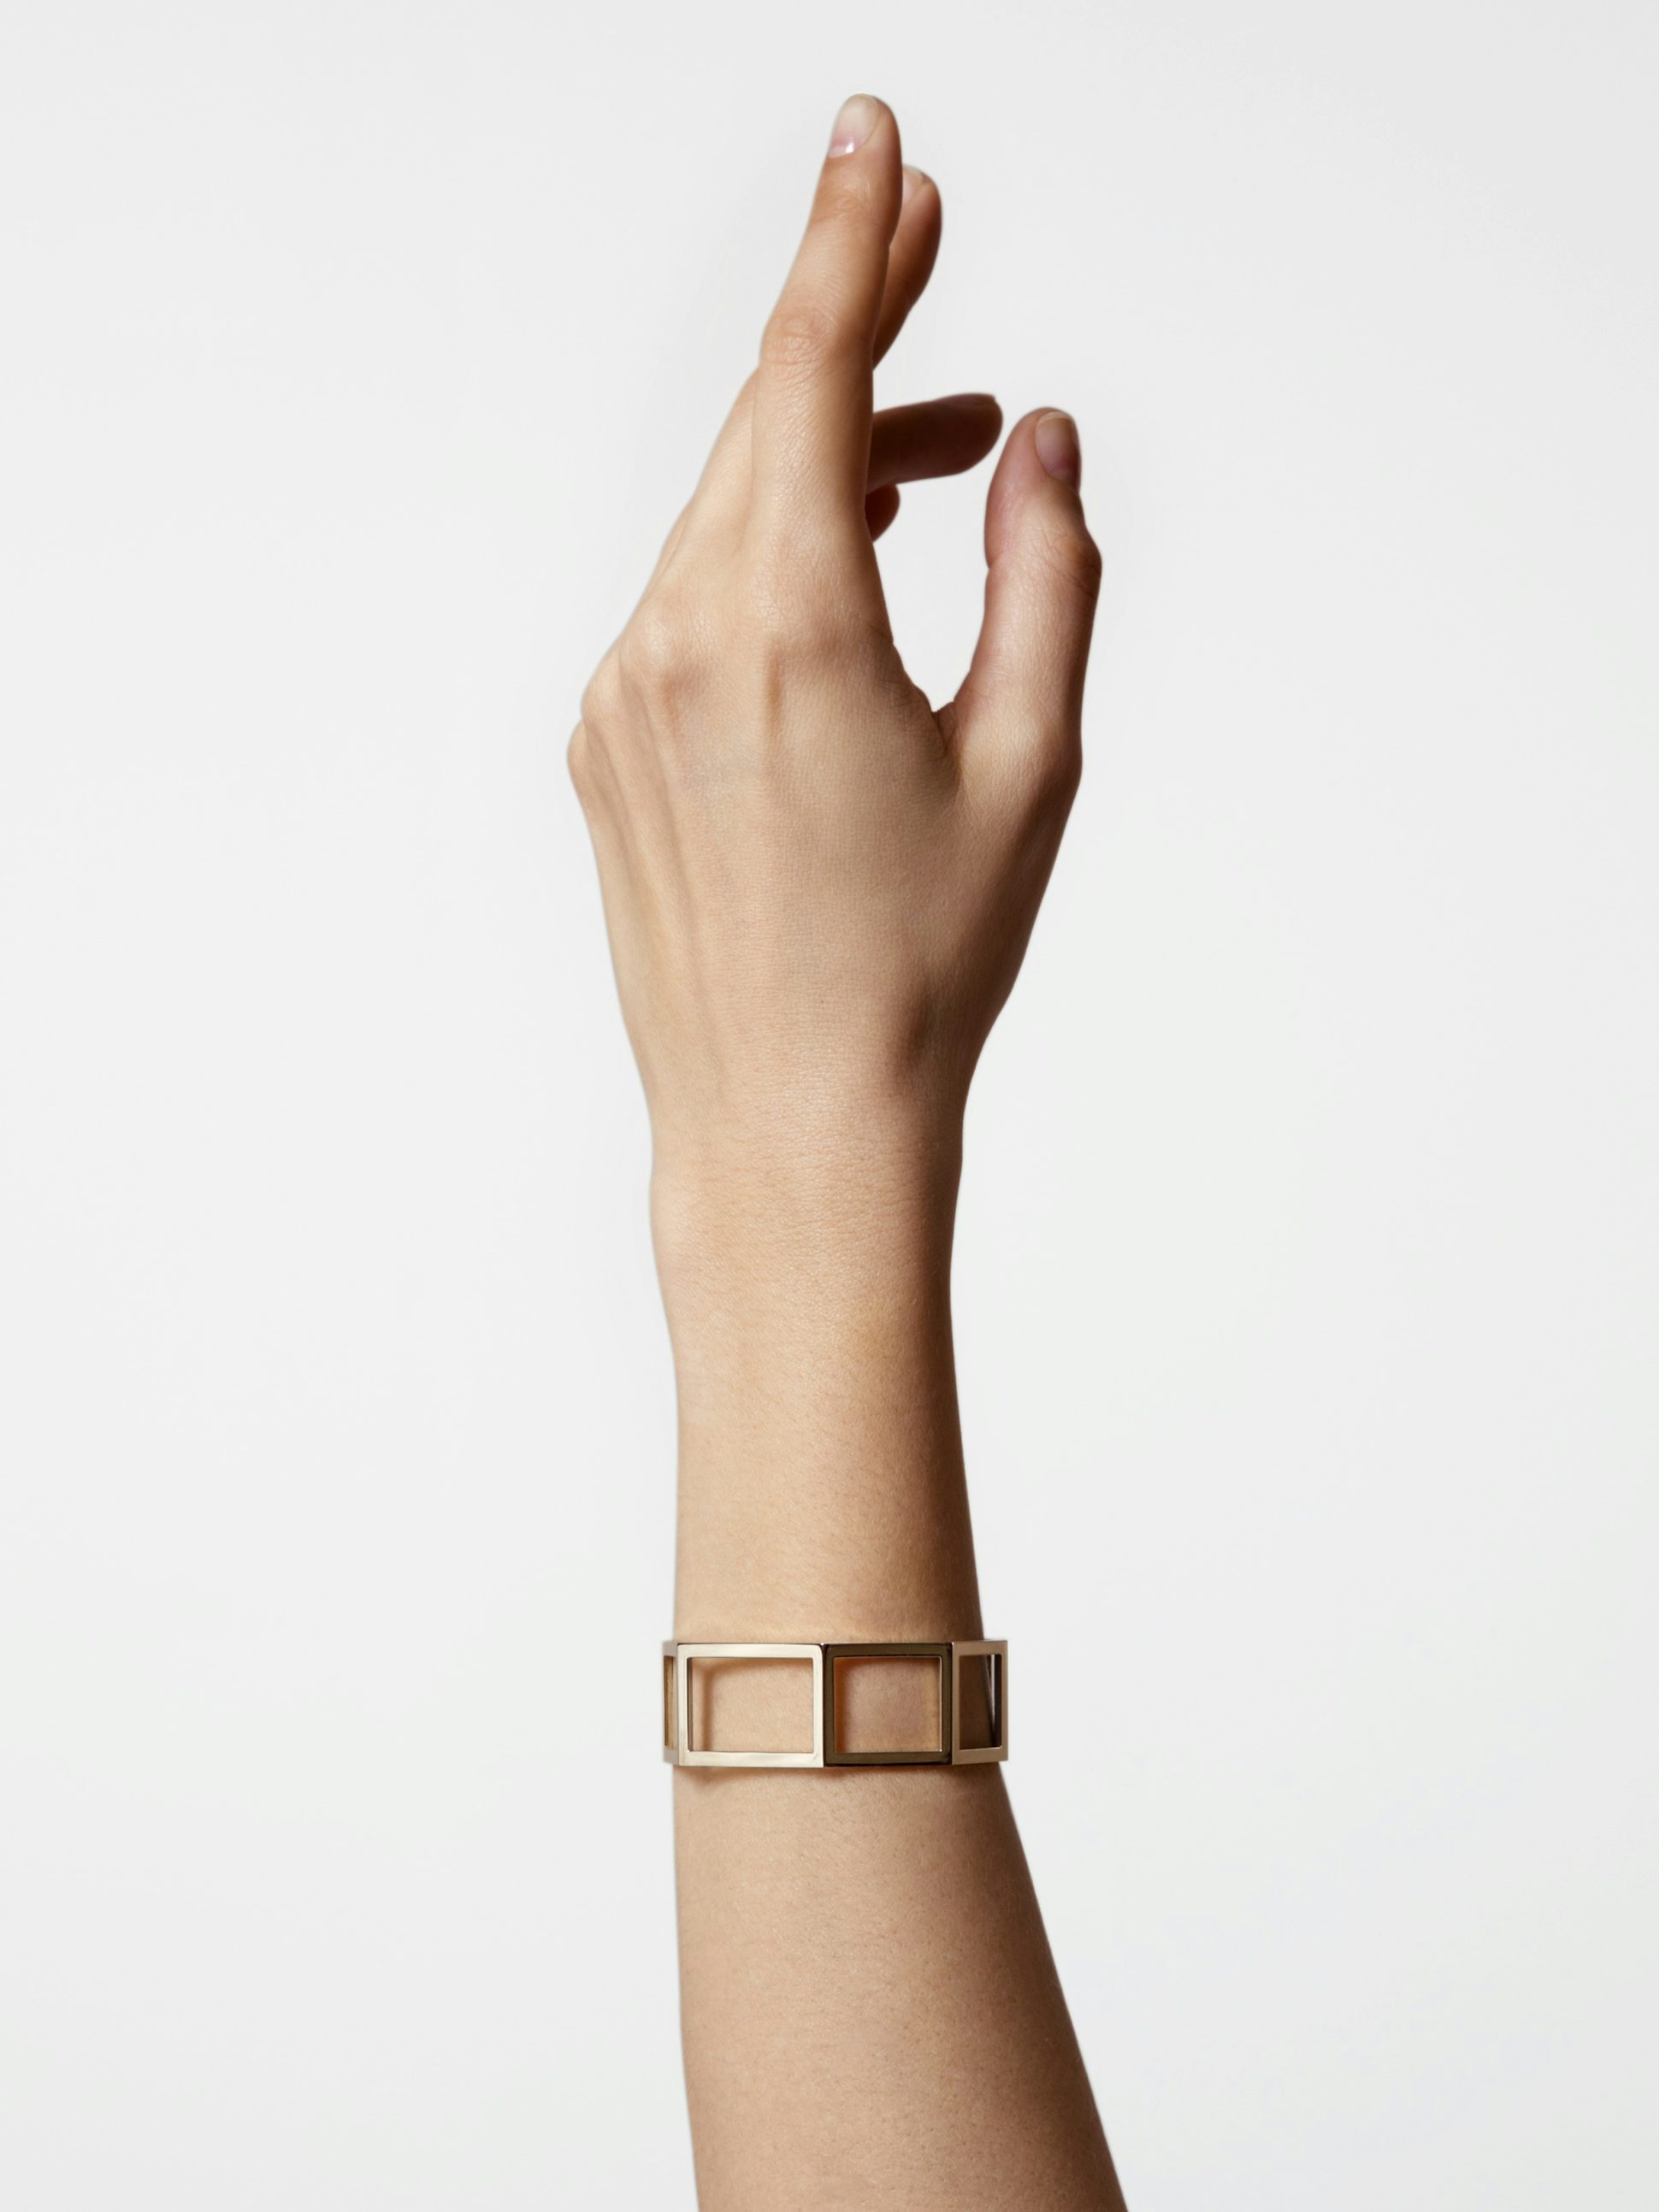 Octogone cuff in 18k Fairmined ethical rose gold (20mm wide)